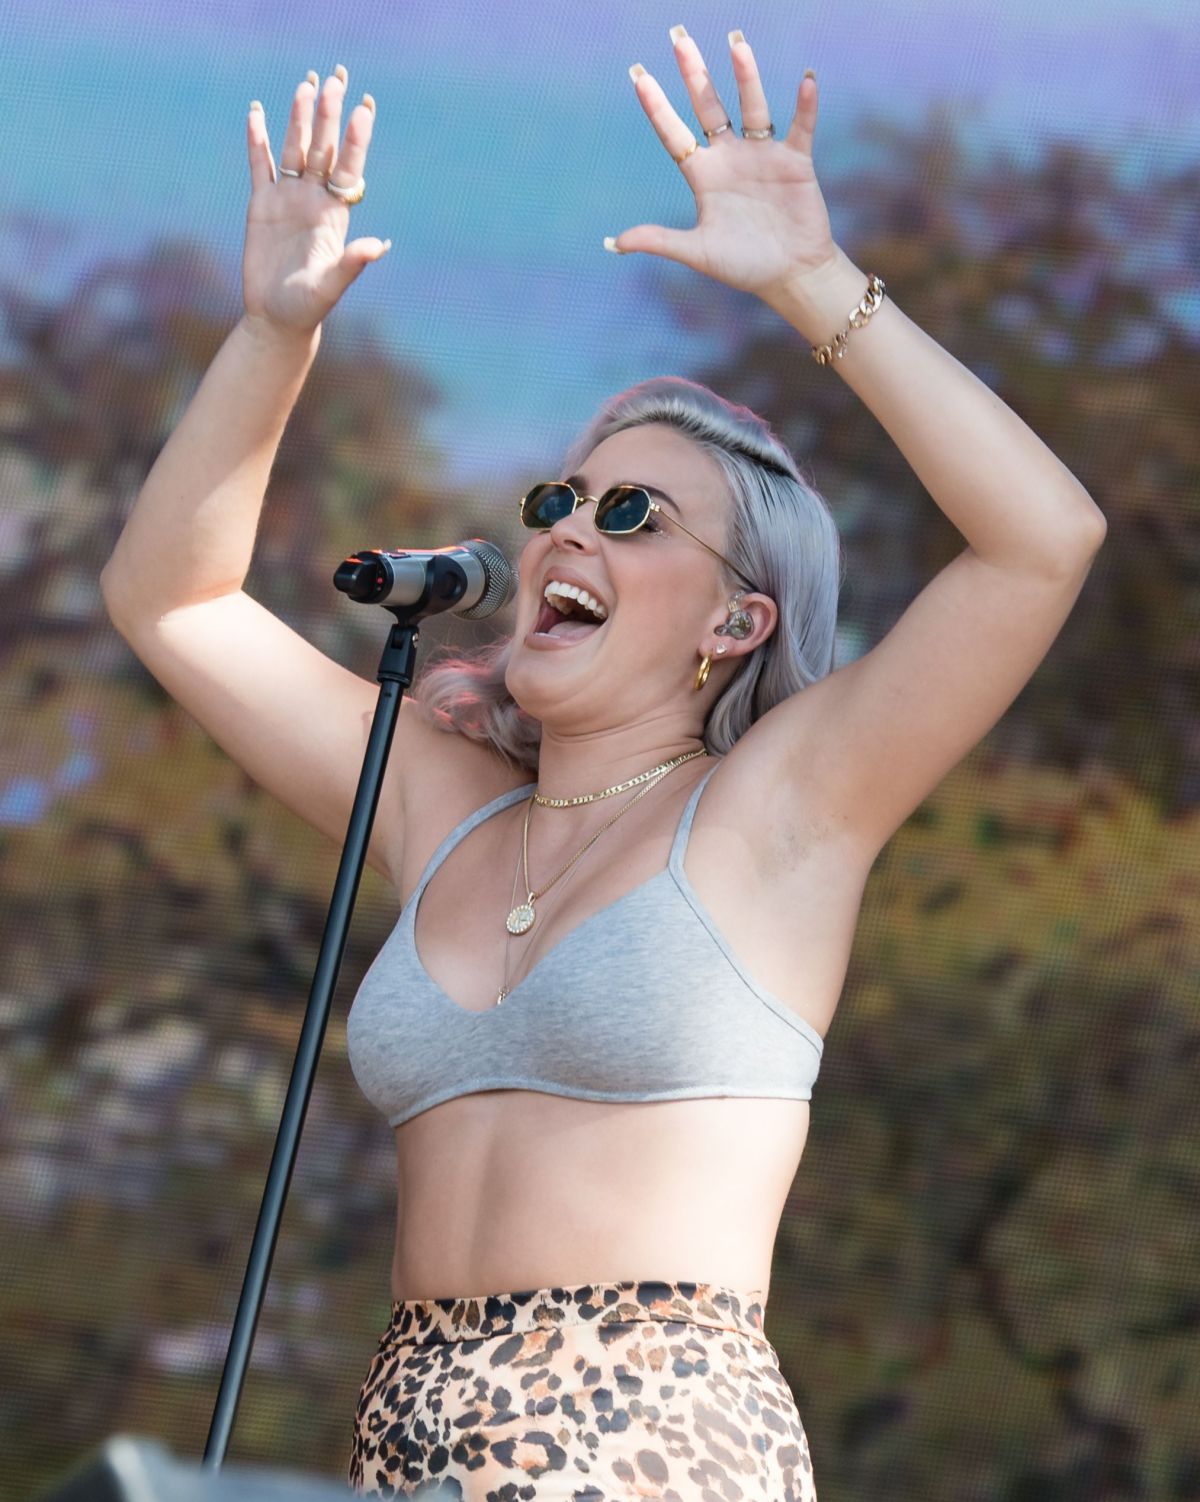 anne-marie-performs-at-british-summer-time-festival-in-london-07-02-2017_12...